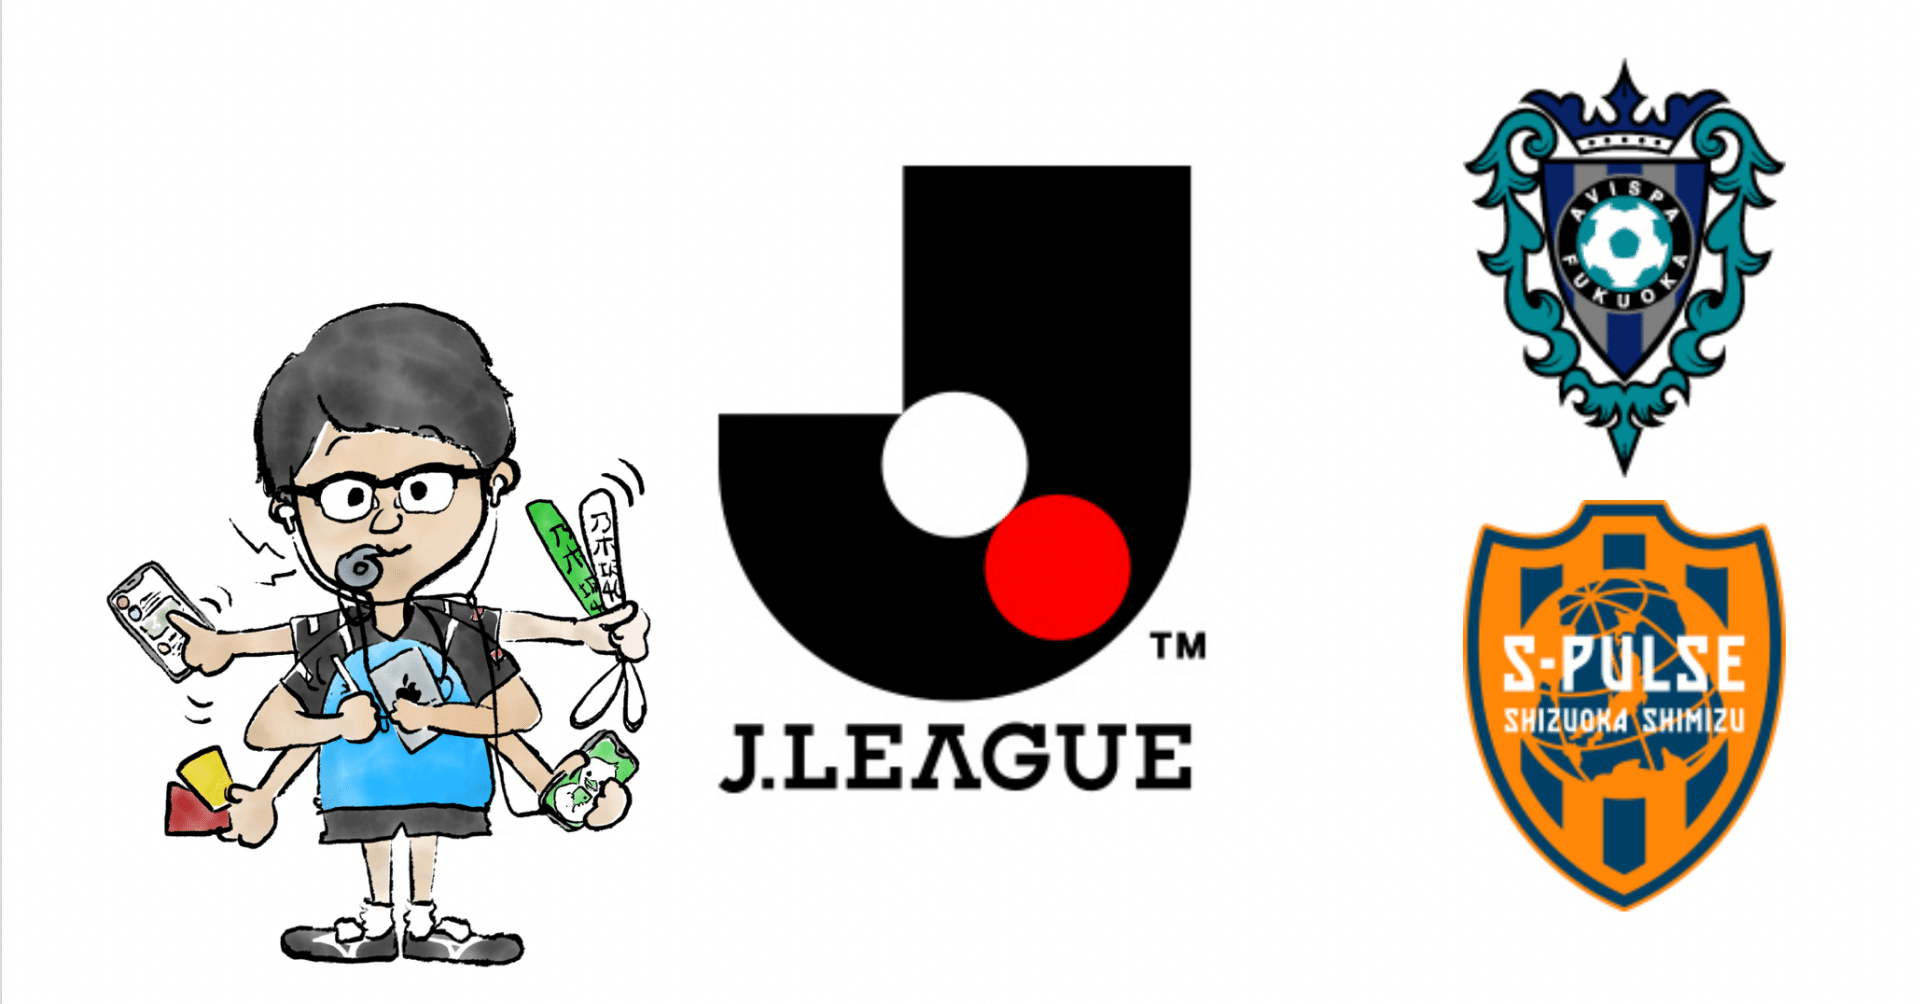 Catch Up J1 League 22 9 17 J1 第30節 アビスパ福岡 清水エスパルス ハイライト せこ まとめ記事用 Note